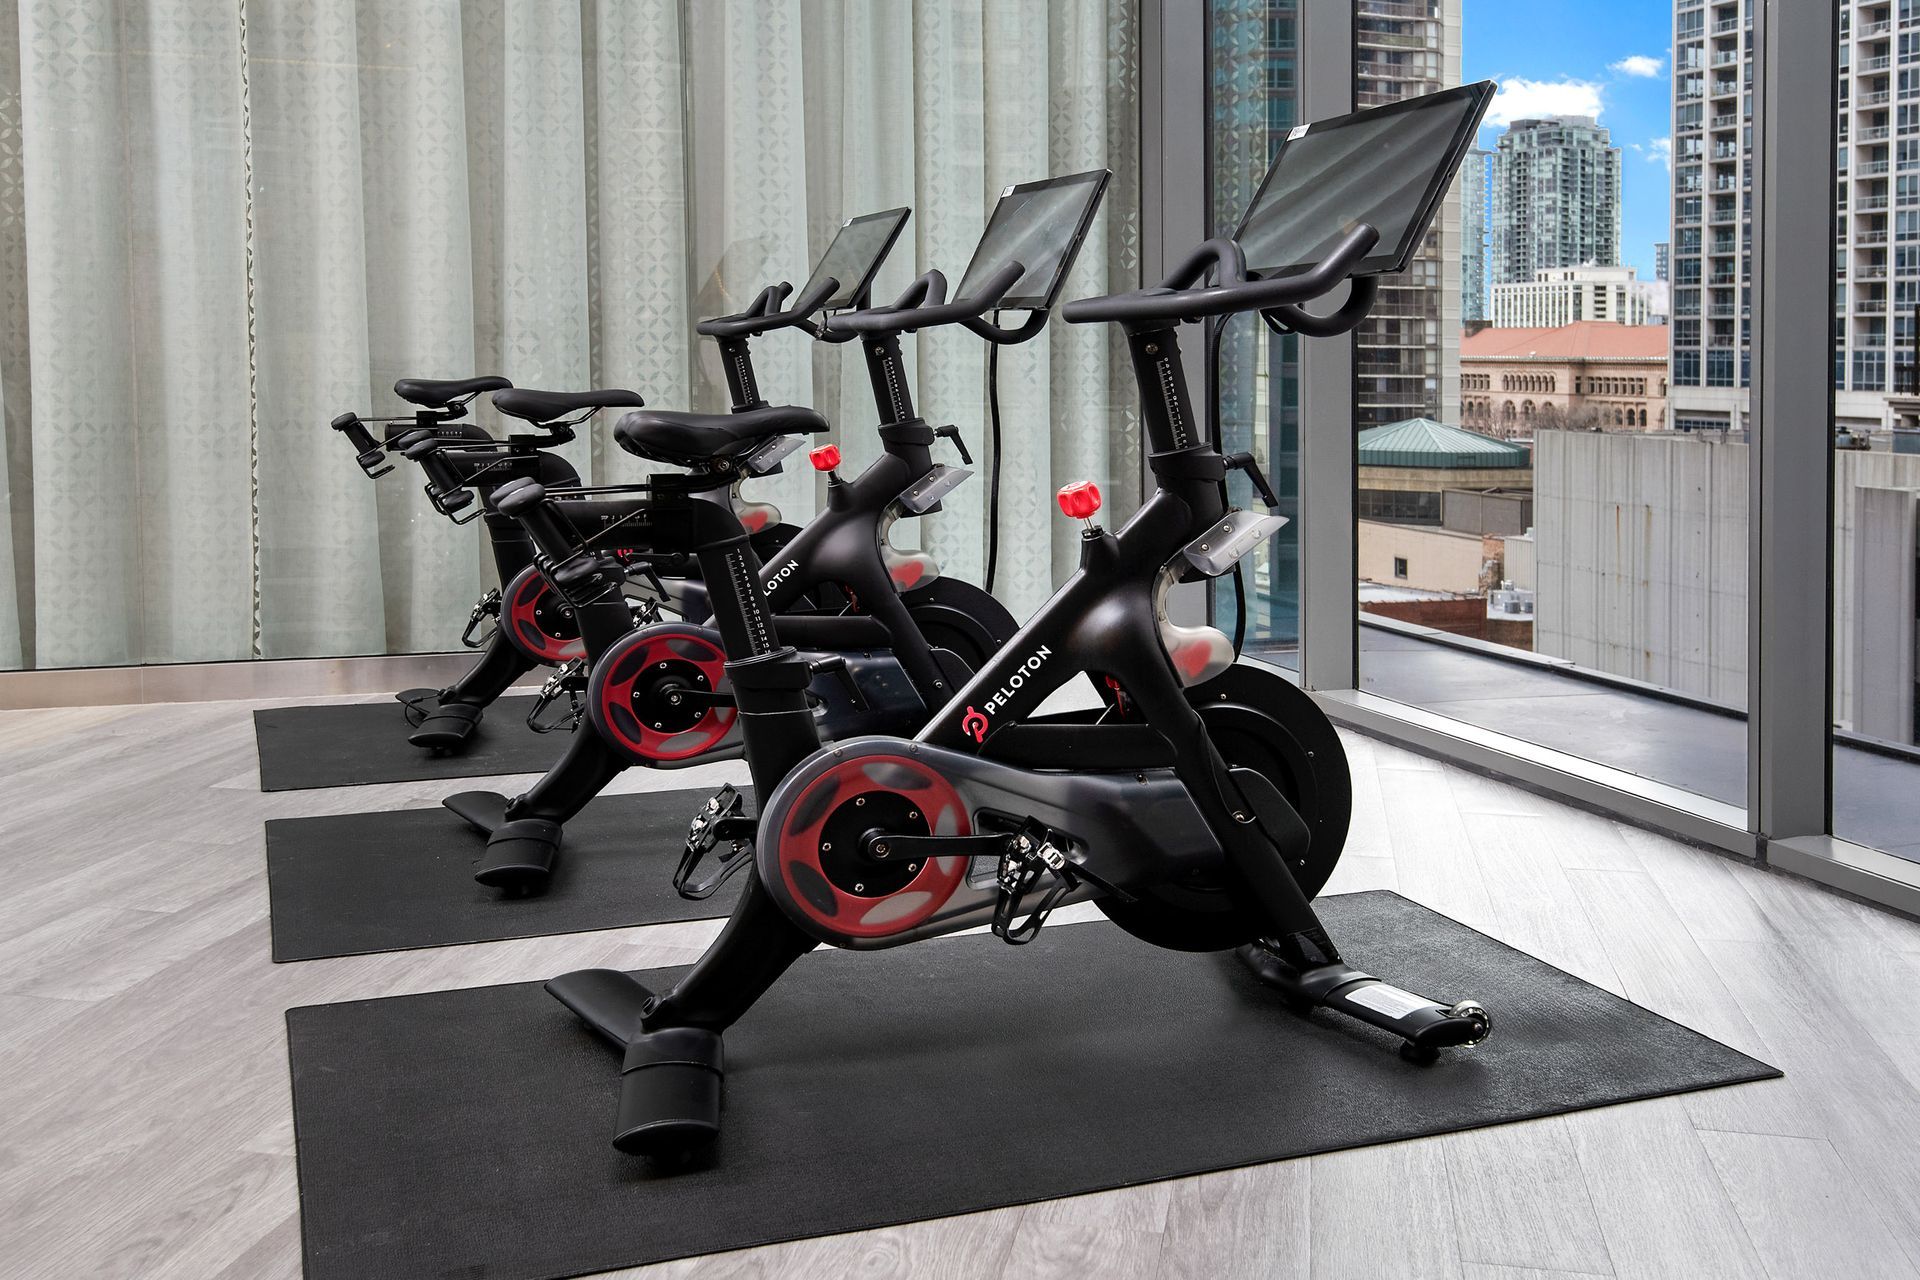 A row of exercise bikes are lined up in a gym.